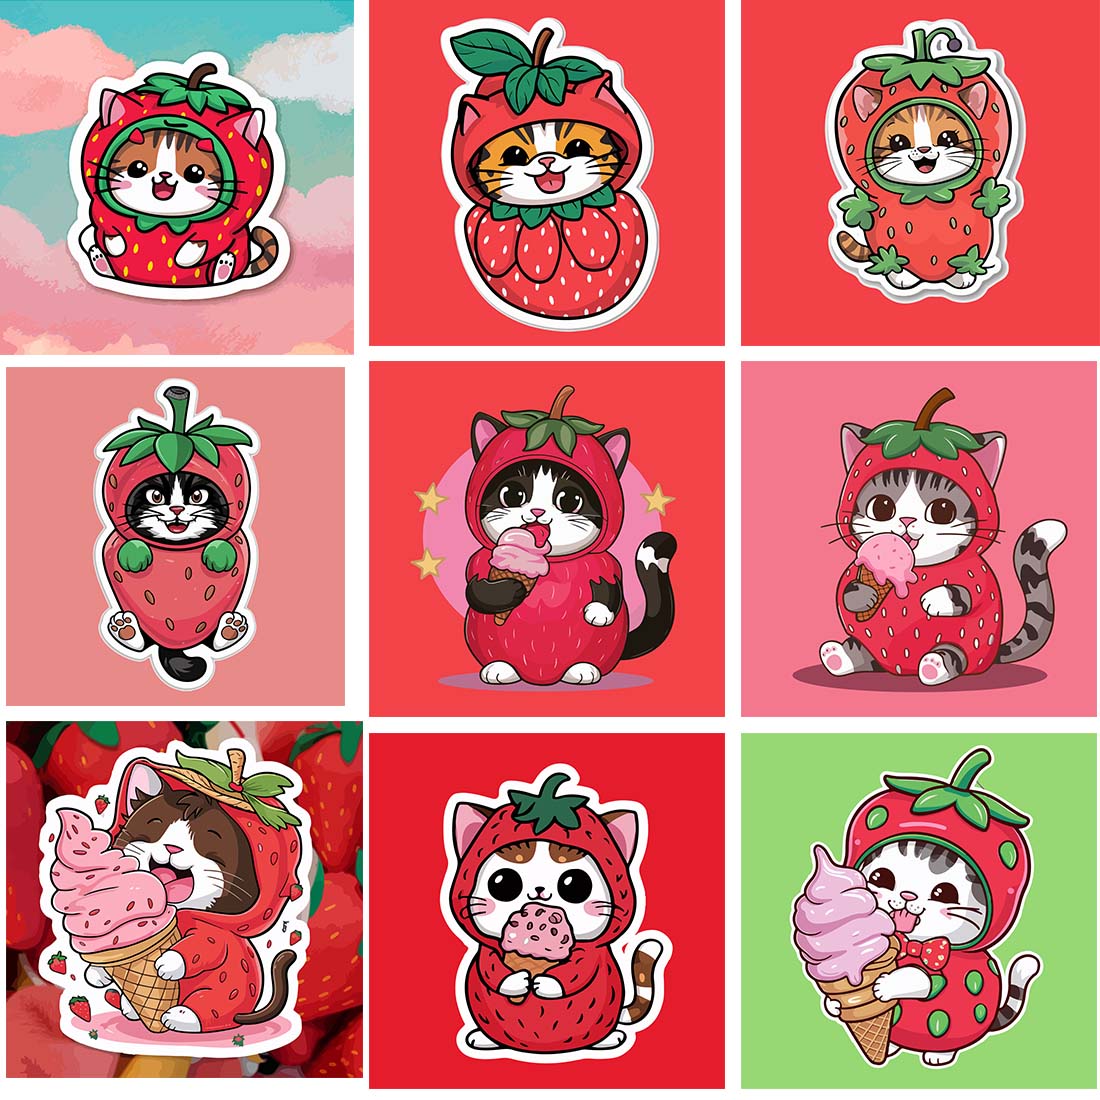 24 cat stikers preview image.